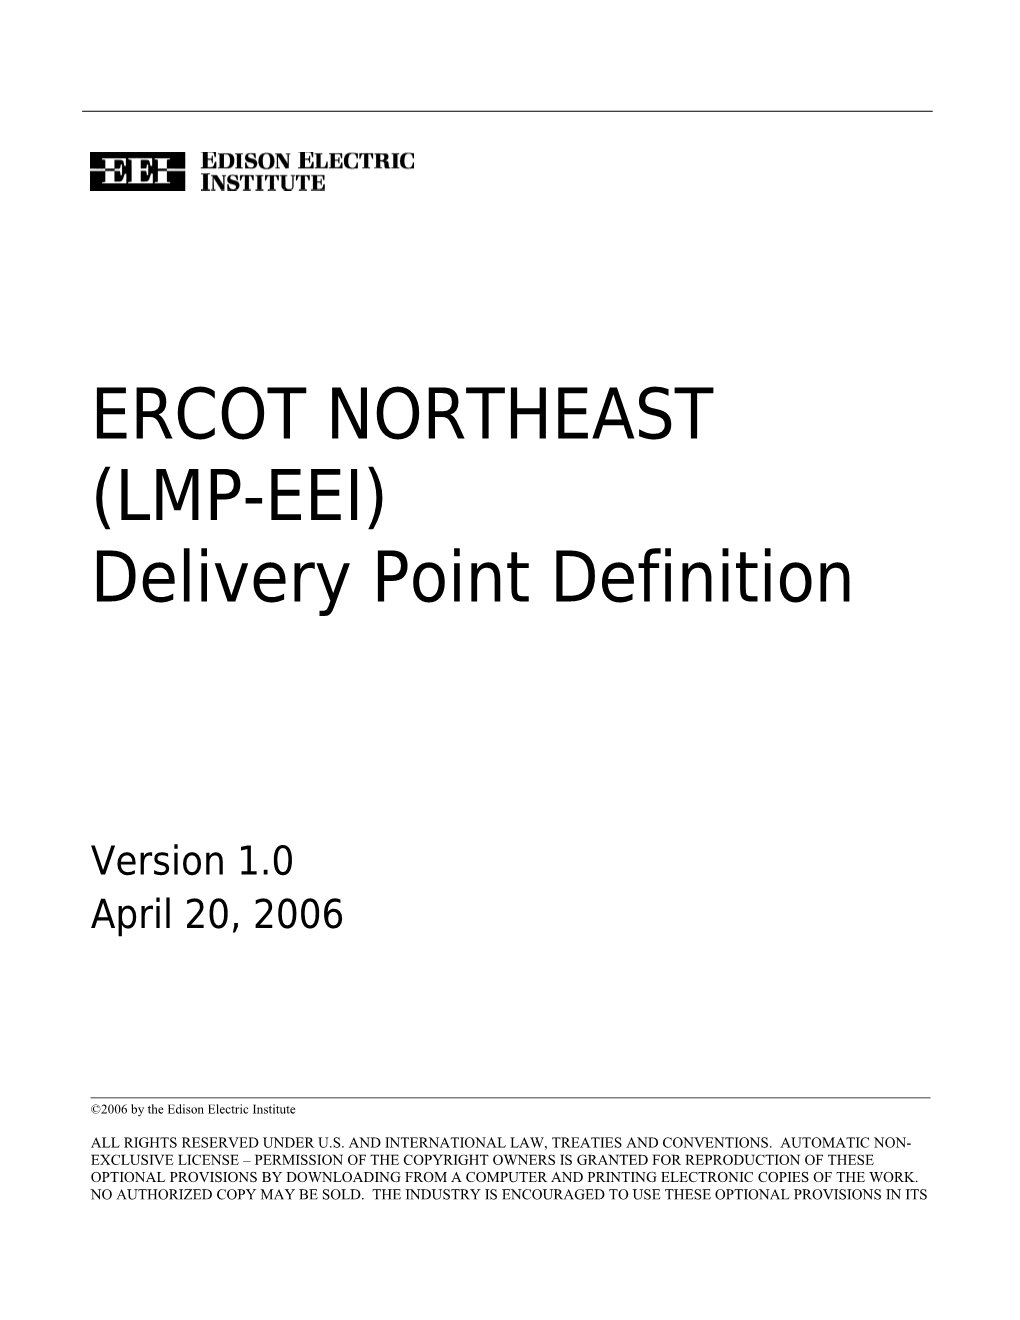 ERCOT Northeast (LMP-EEI) Delivery Point Definition, Version 1.0, 4/20/061